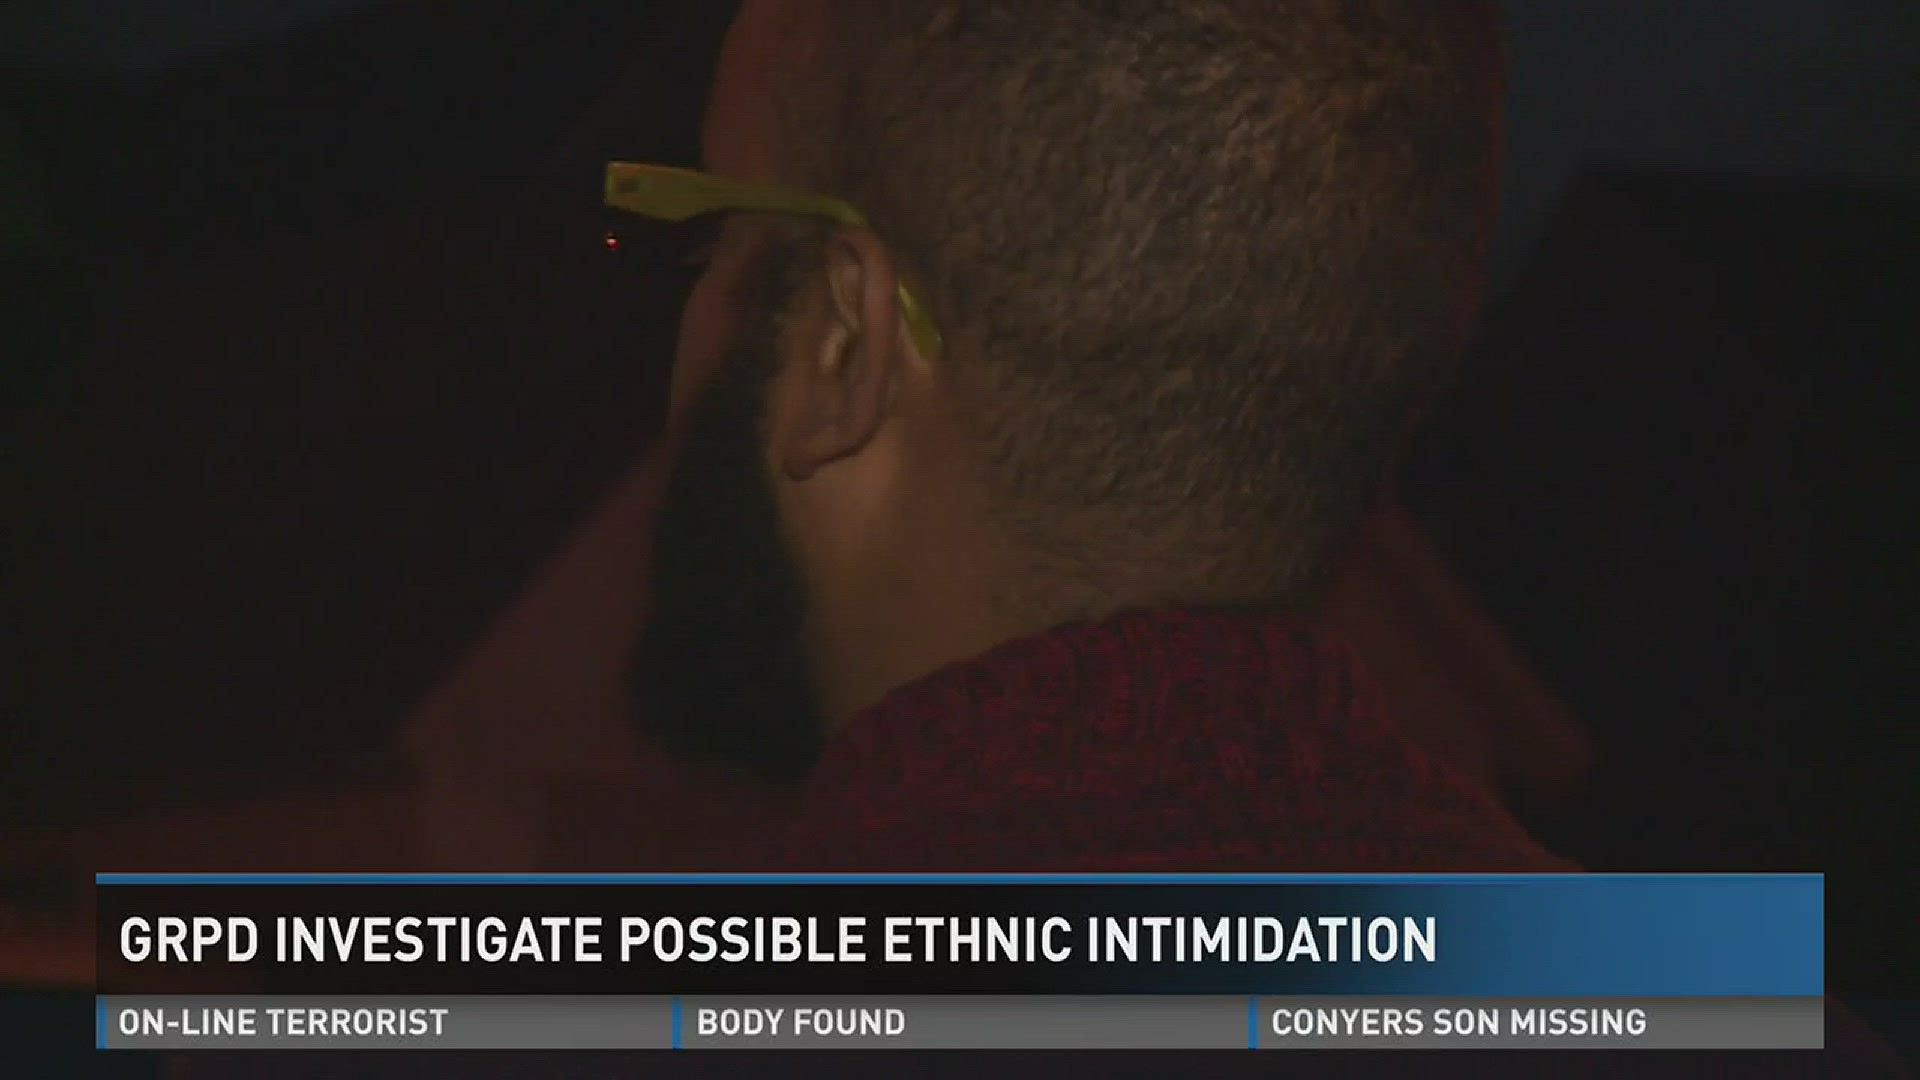 GRPD investigate possible ethnic intimidation